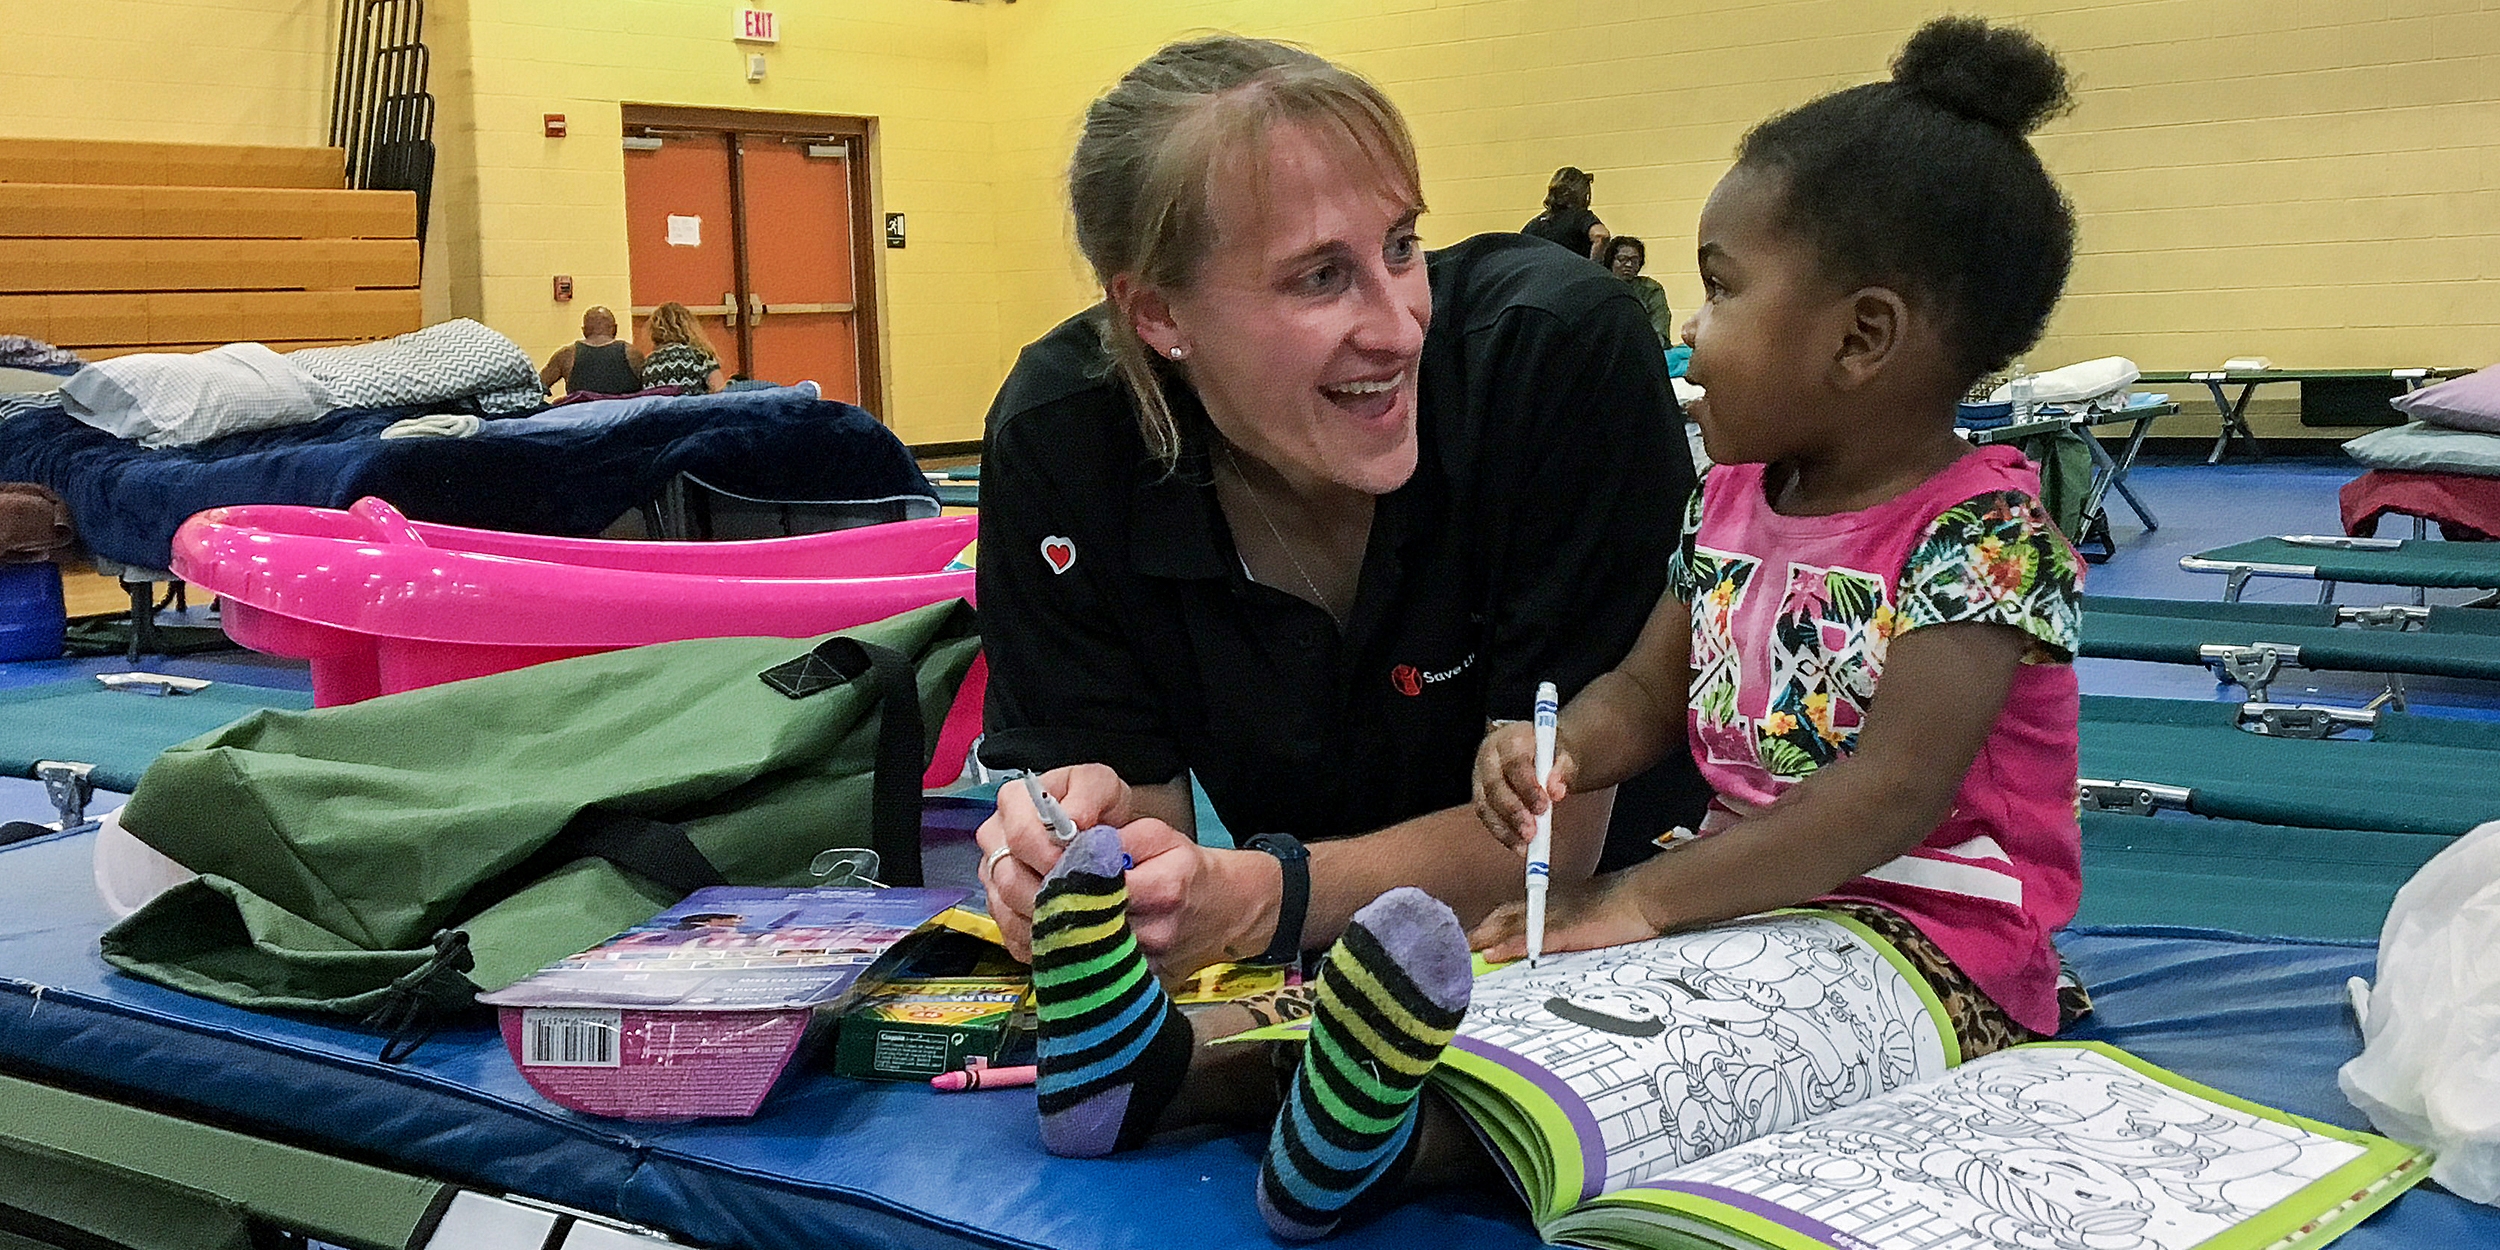 Sarah Thompson, Director of Preparedness for Save the Children, colors with a 2-year-old girl at a shelter in Jacksonville, Florida. Save the Children distributed cribs, infant hygiene supplies and activities to families in the aftermath of Hurricane Irma. Photo credit: Sara Neumann/Save the Children, September 2017.